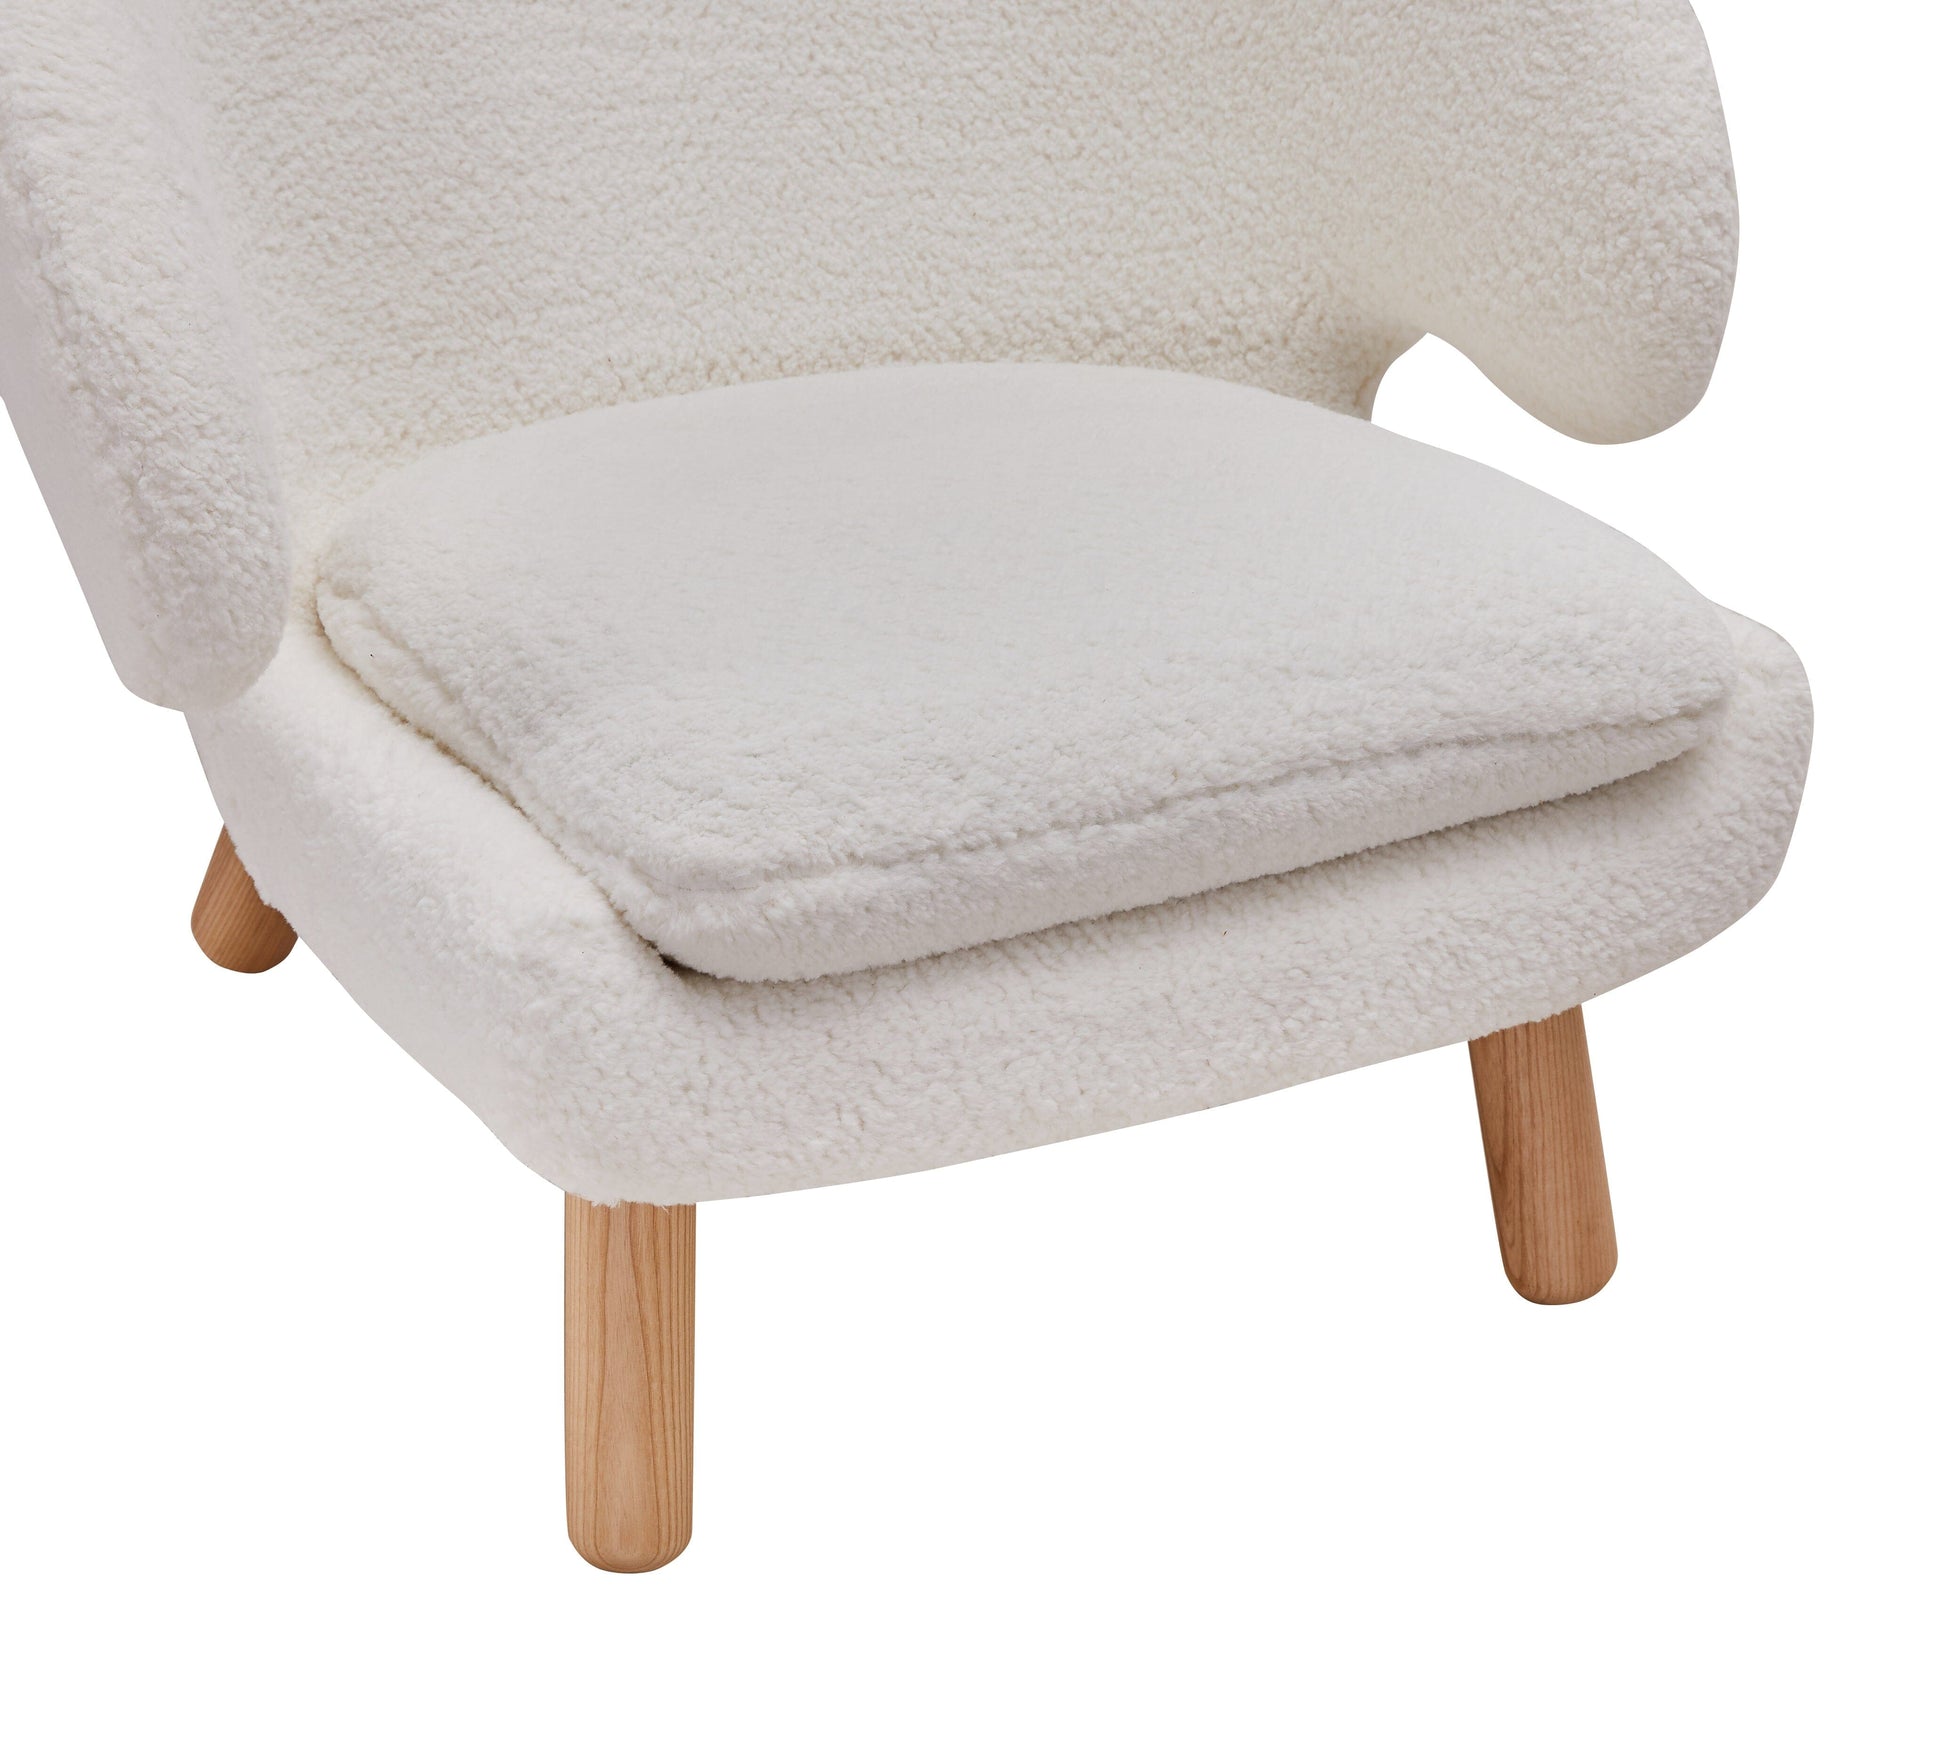 Zoey Accent Chair - White Sherpa